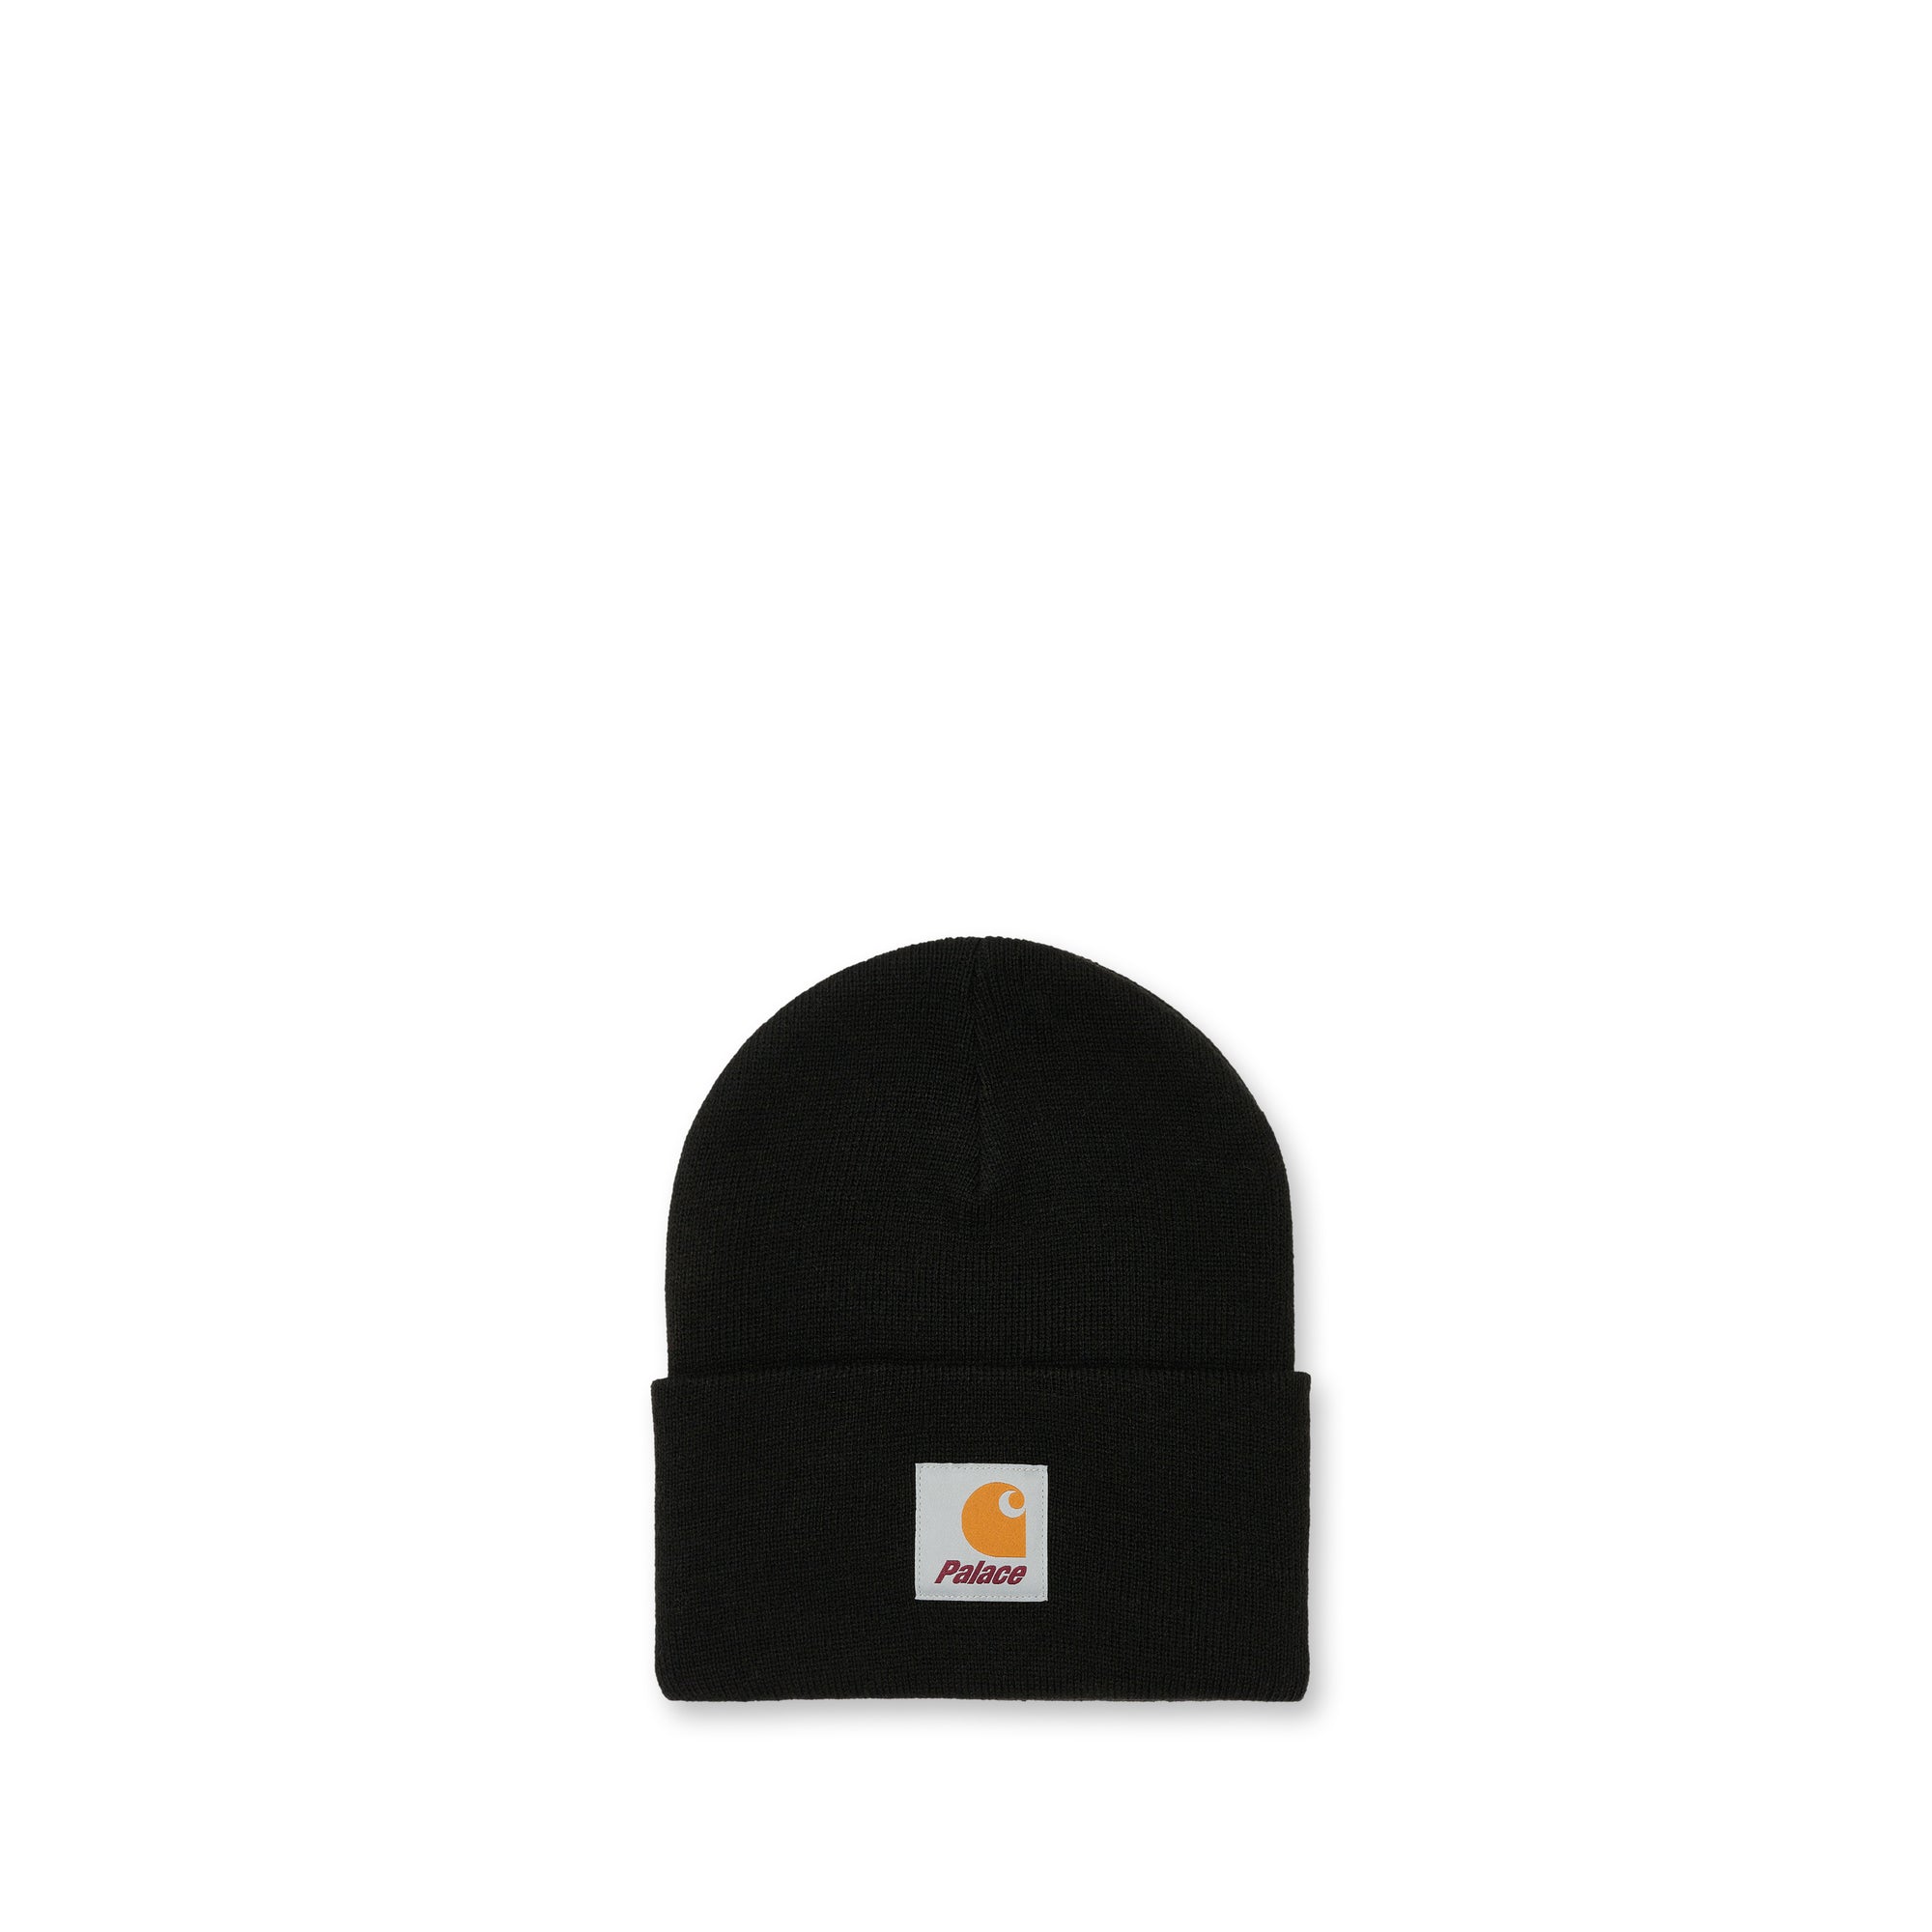 Palace - Carhartt WIP Watch Hat - (Black) view 1